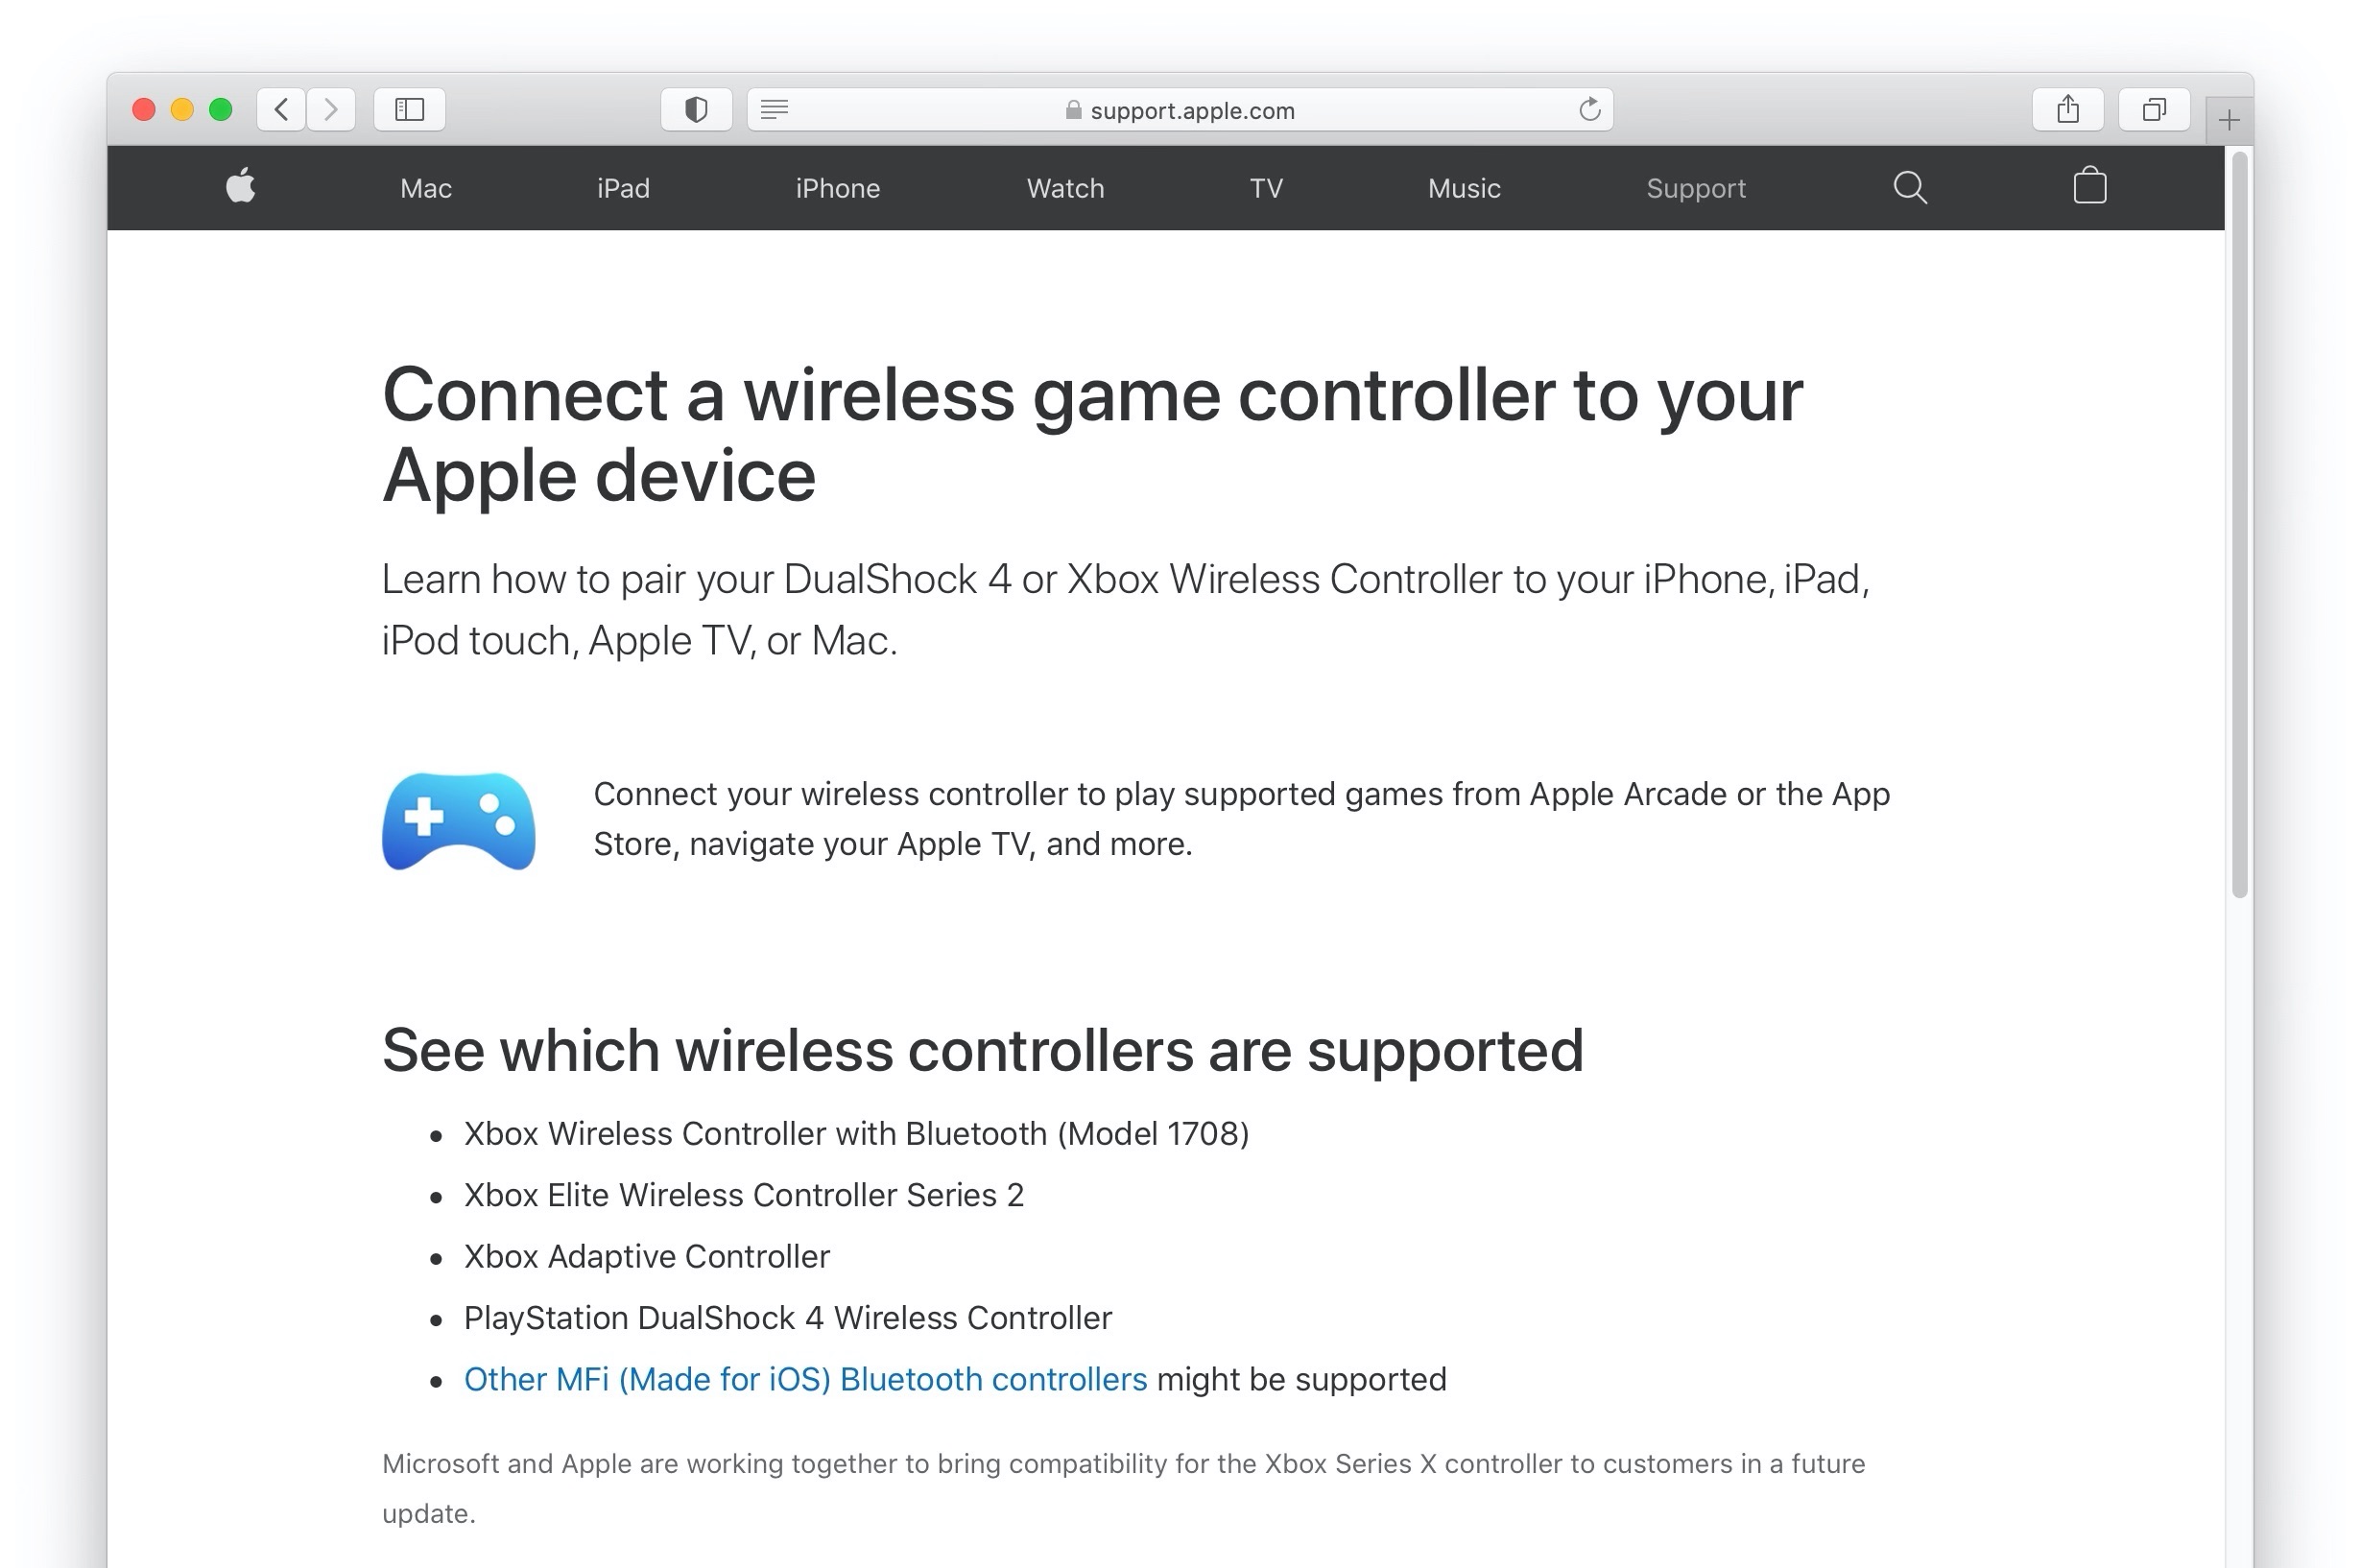 Wireless game controller to your Apple device